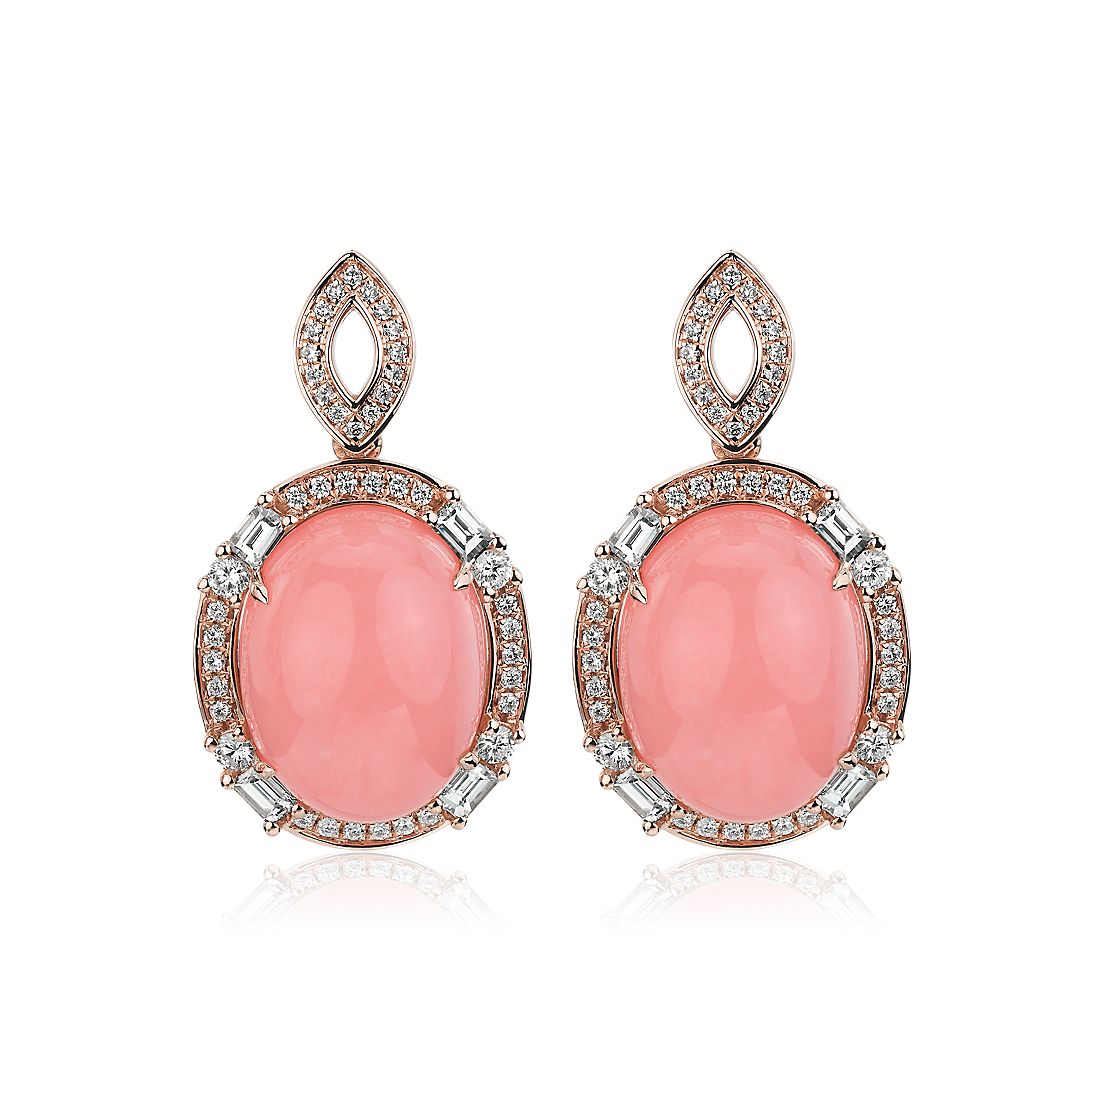 Oval Cabochon Pink Opal Drop Earrings with Baguette Diamond Halo - 18k Rose Gold